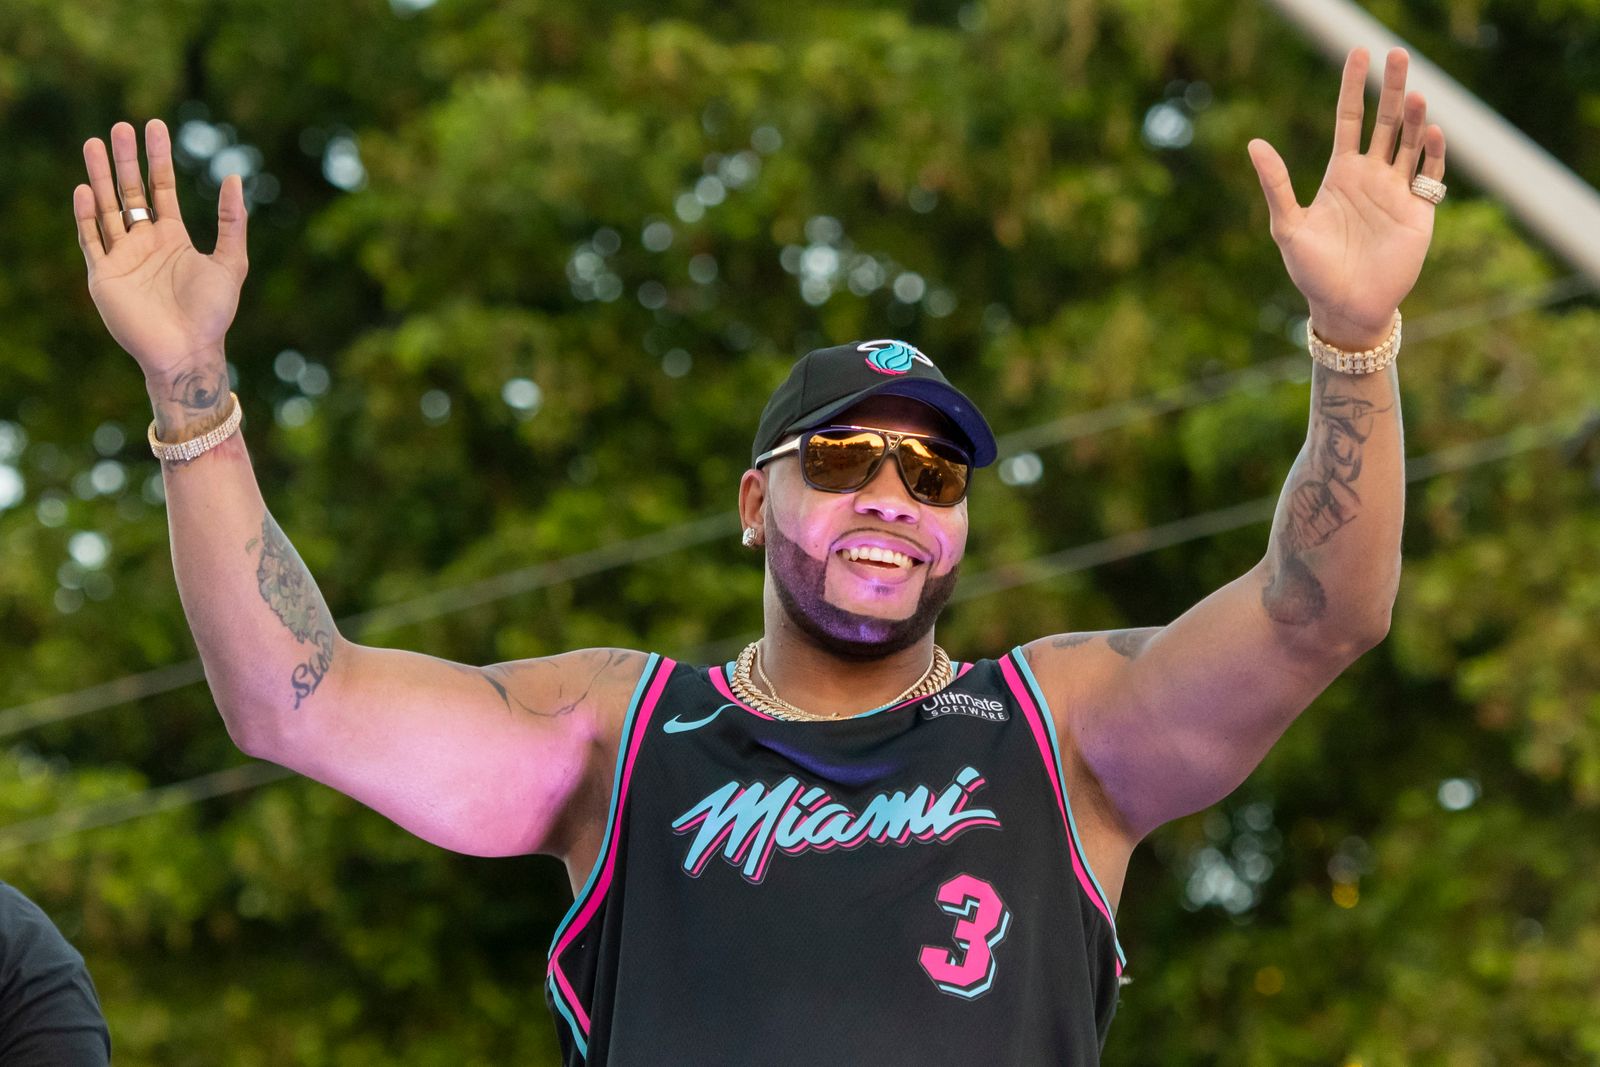 A Showcase of Floats & FLO RIDA Latest Stories News & Events